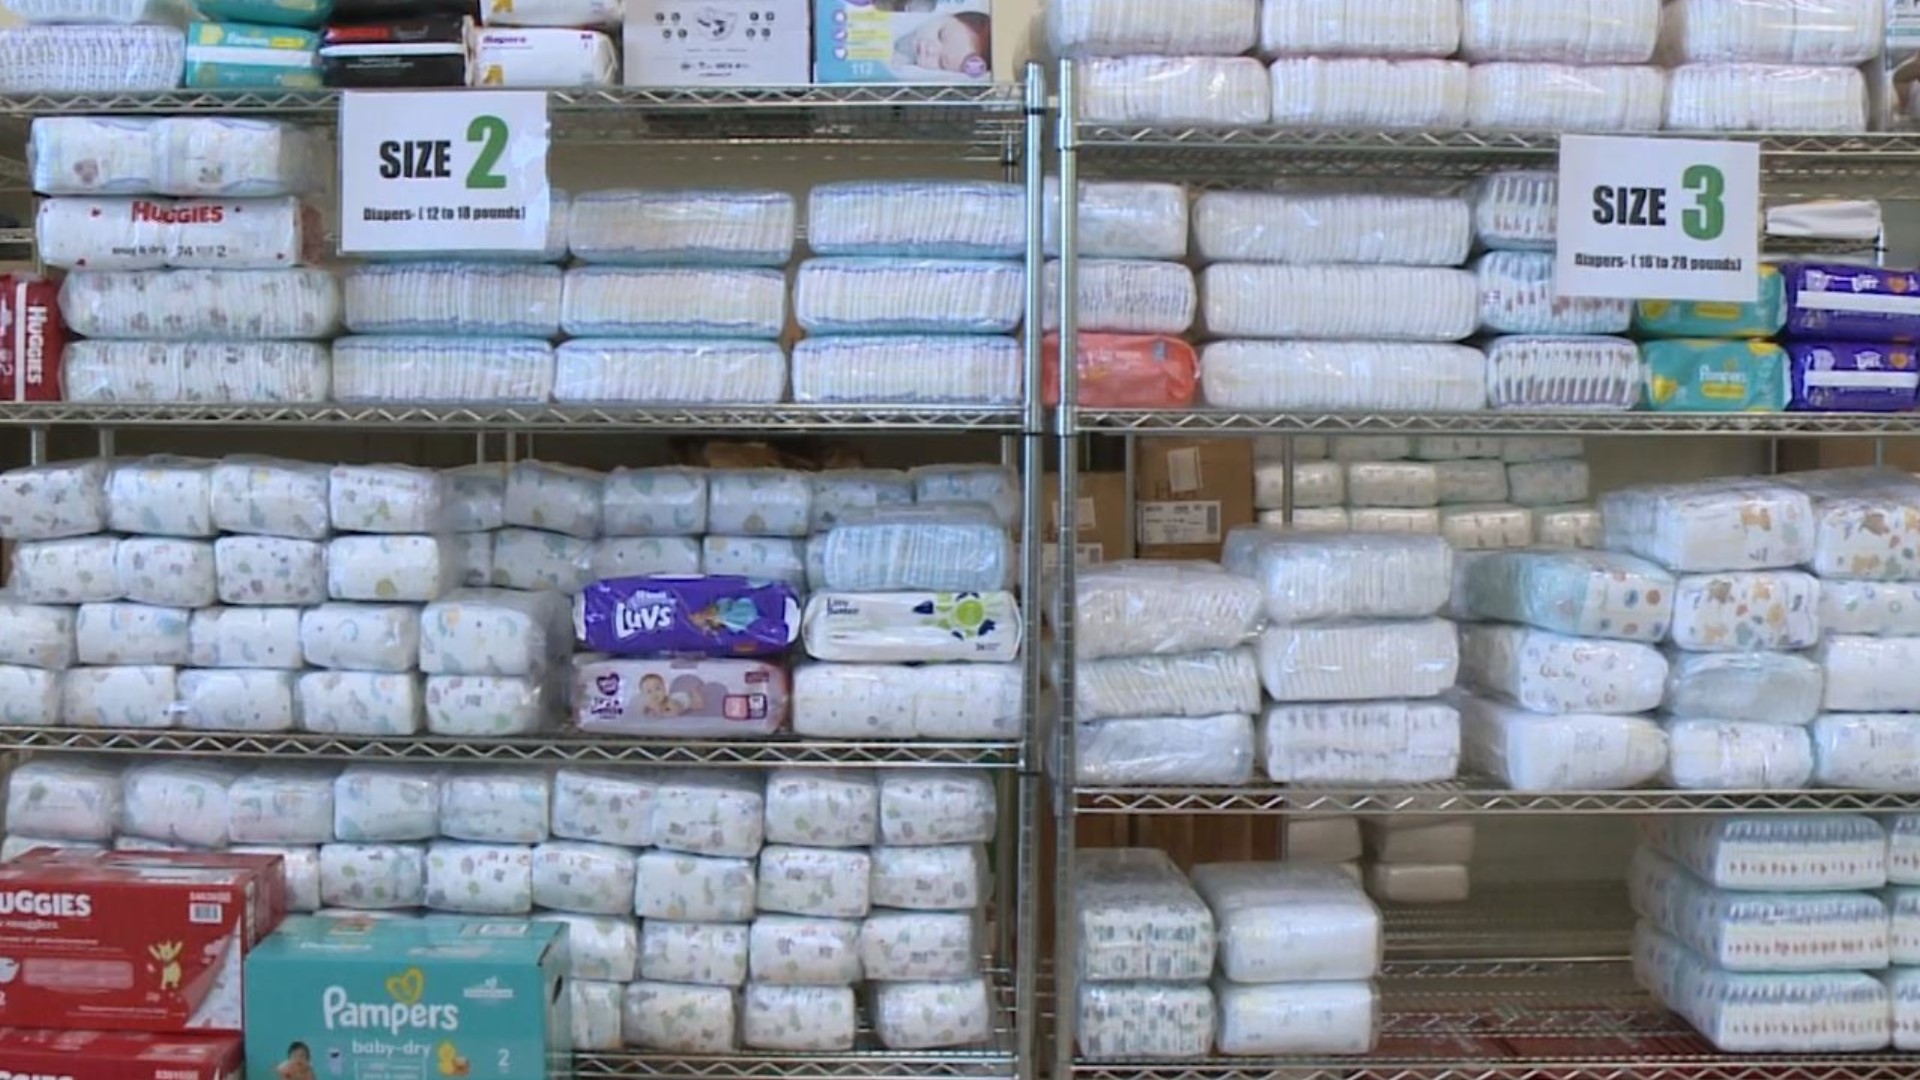 Families who are struggling can visit TEAM Inc.'s diaper room for free diapers as more families struggle to make ends meet.